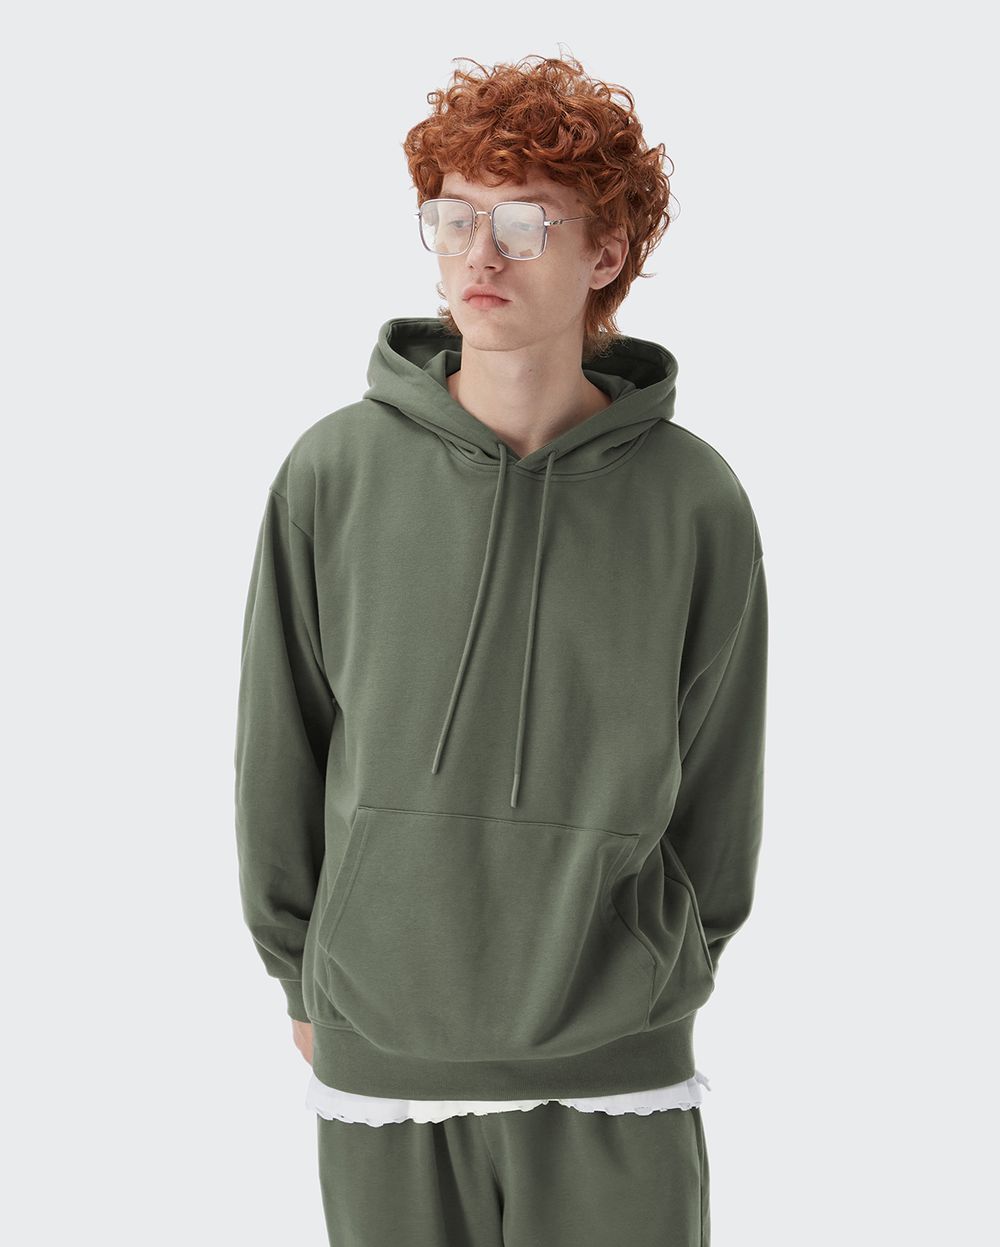 Classic Unisex Solid Color Hoodies